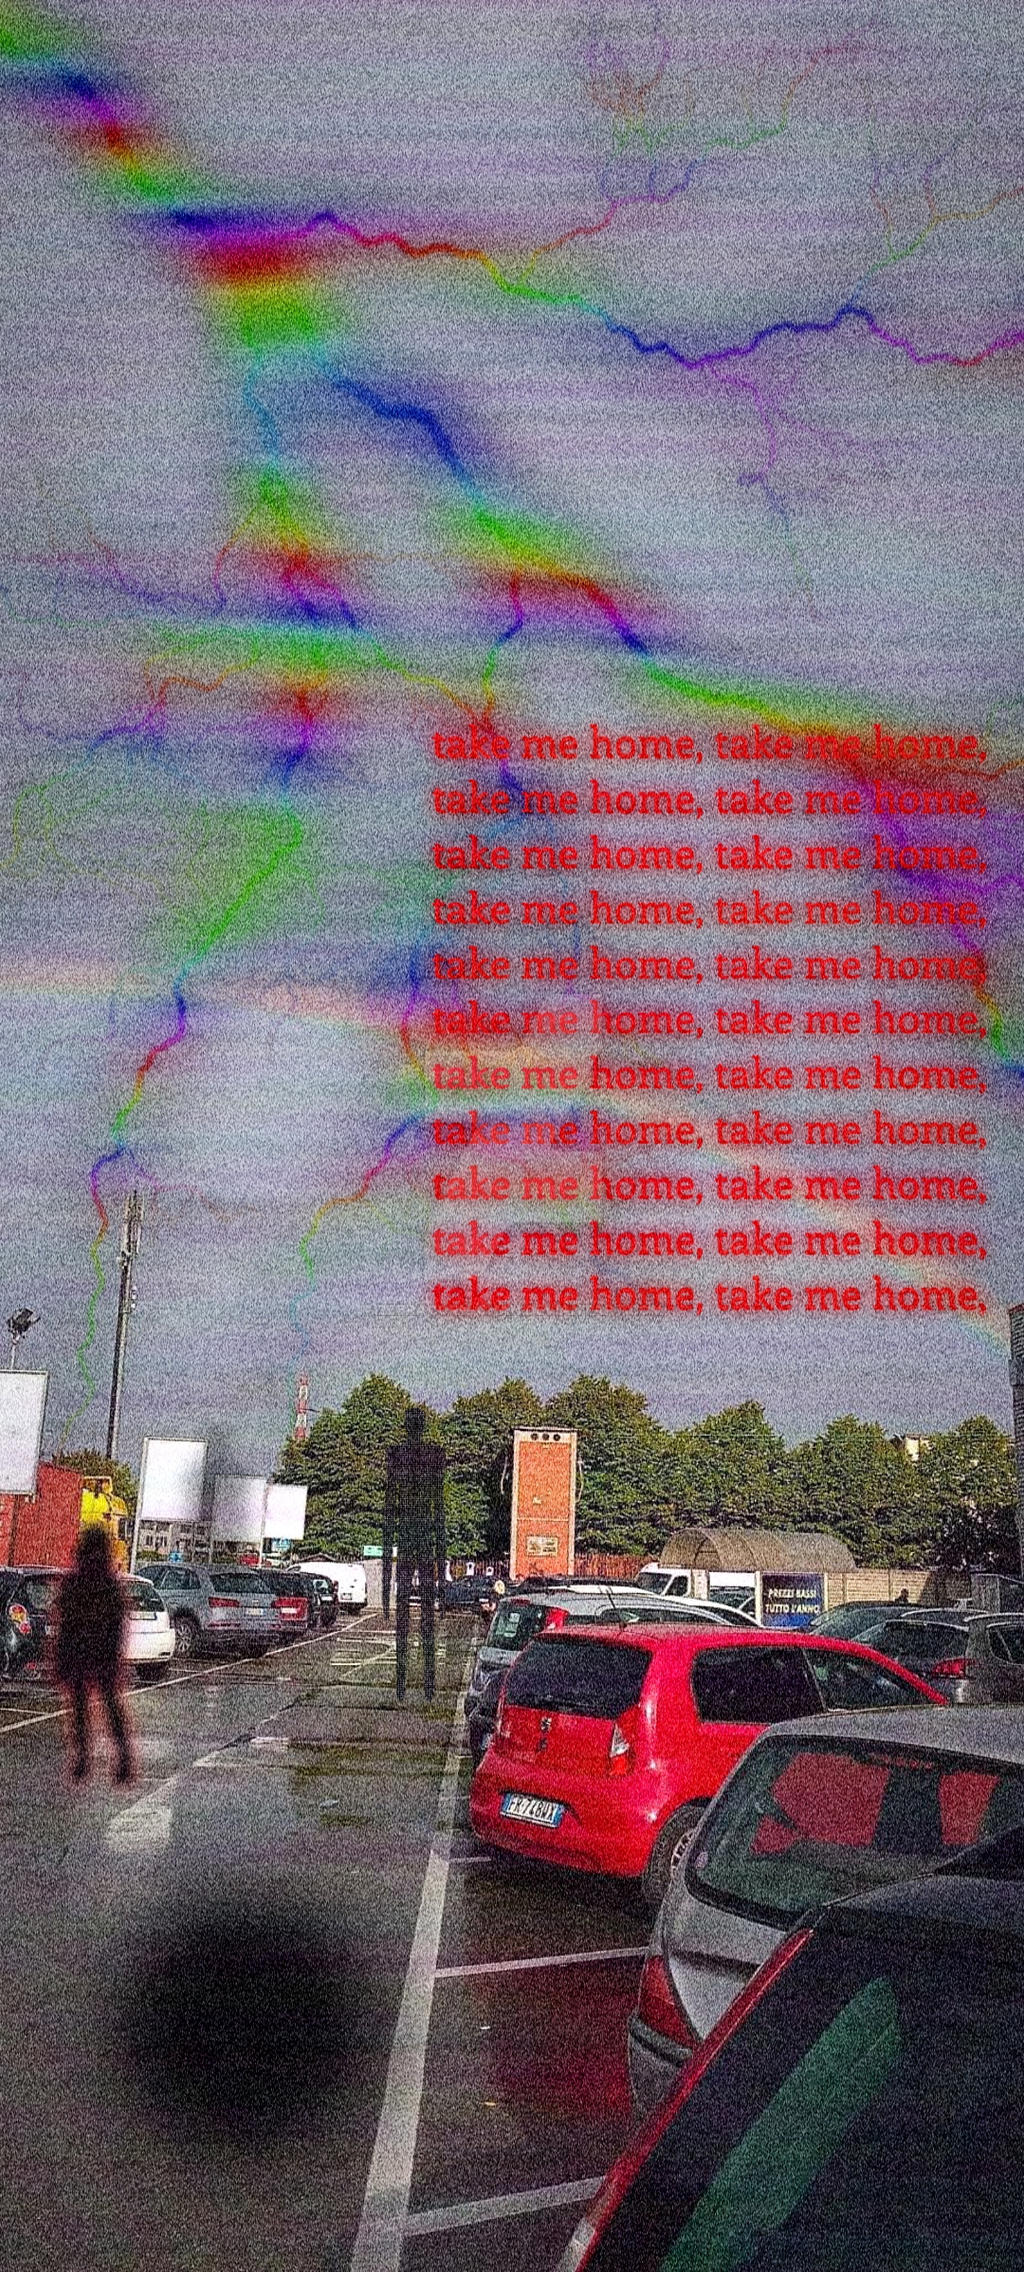 Weirdcore Aesthetic - Take Me Home by Zebracorn-chan on DeviantArt